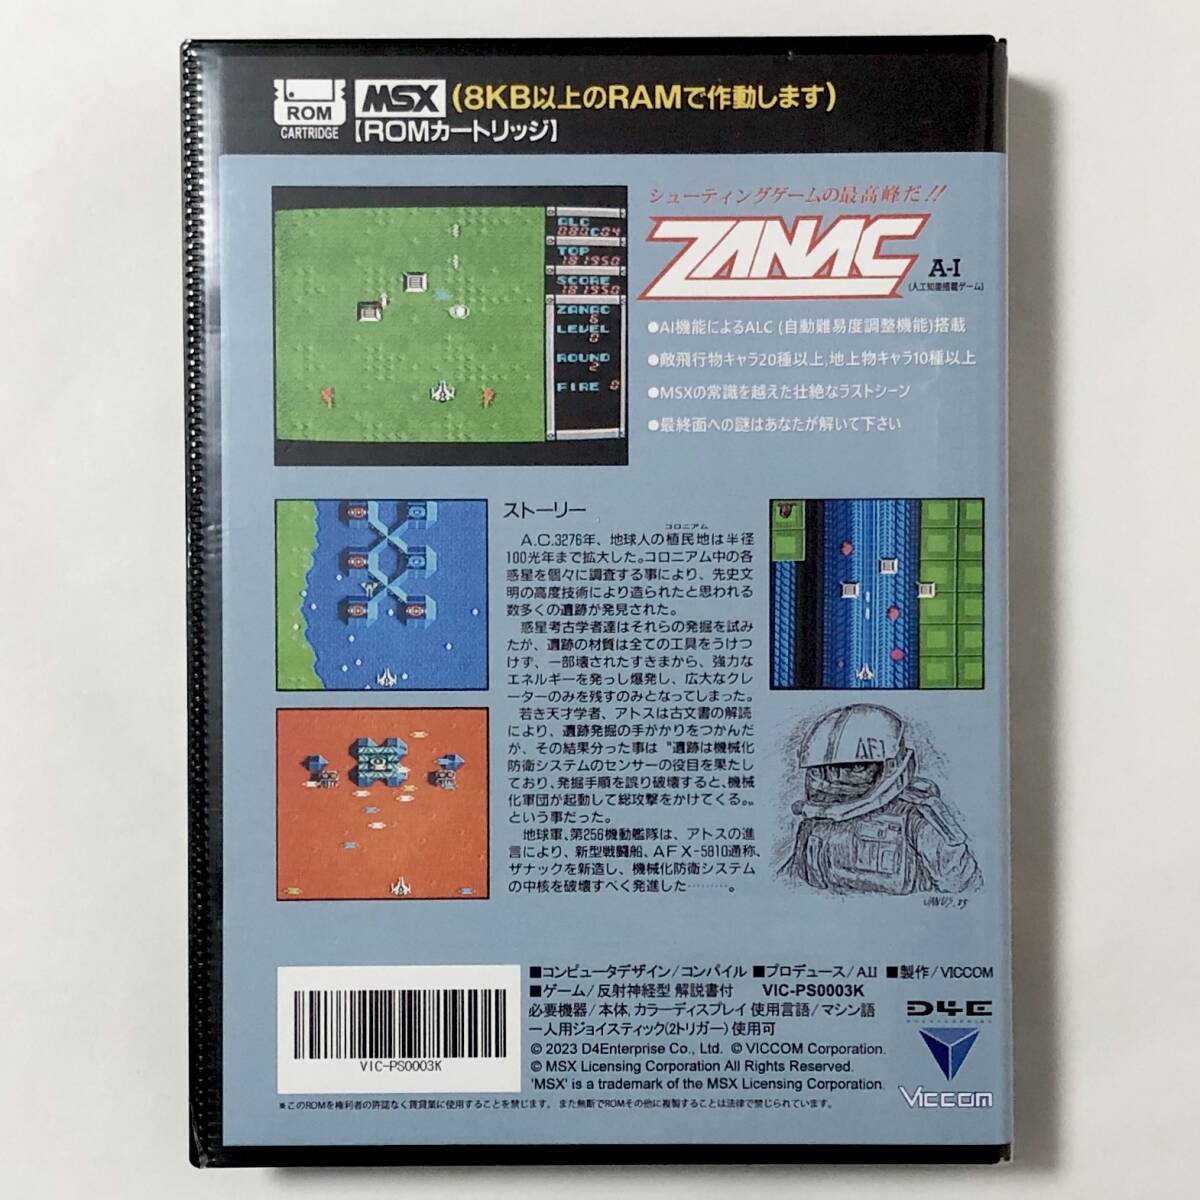 MSX 2023 year reprint The nak box opinion attaching breaking the seal ending soft unused section damage equipped MSX Fukkoku-ban Zanac Viccom D4 Enterprise Compile